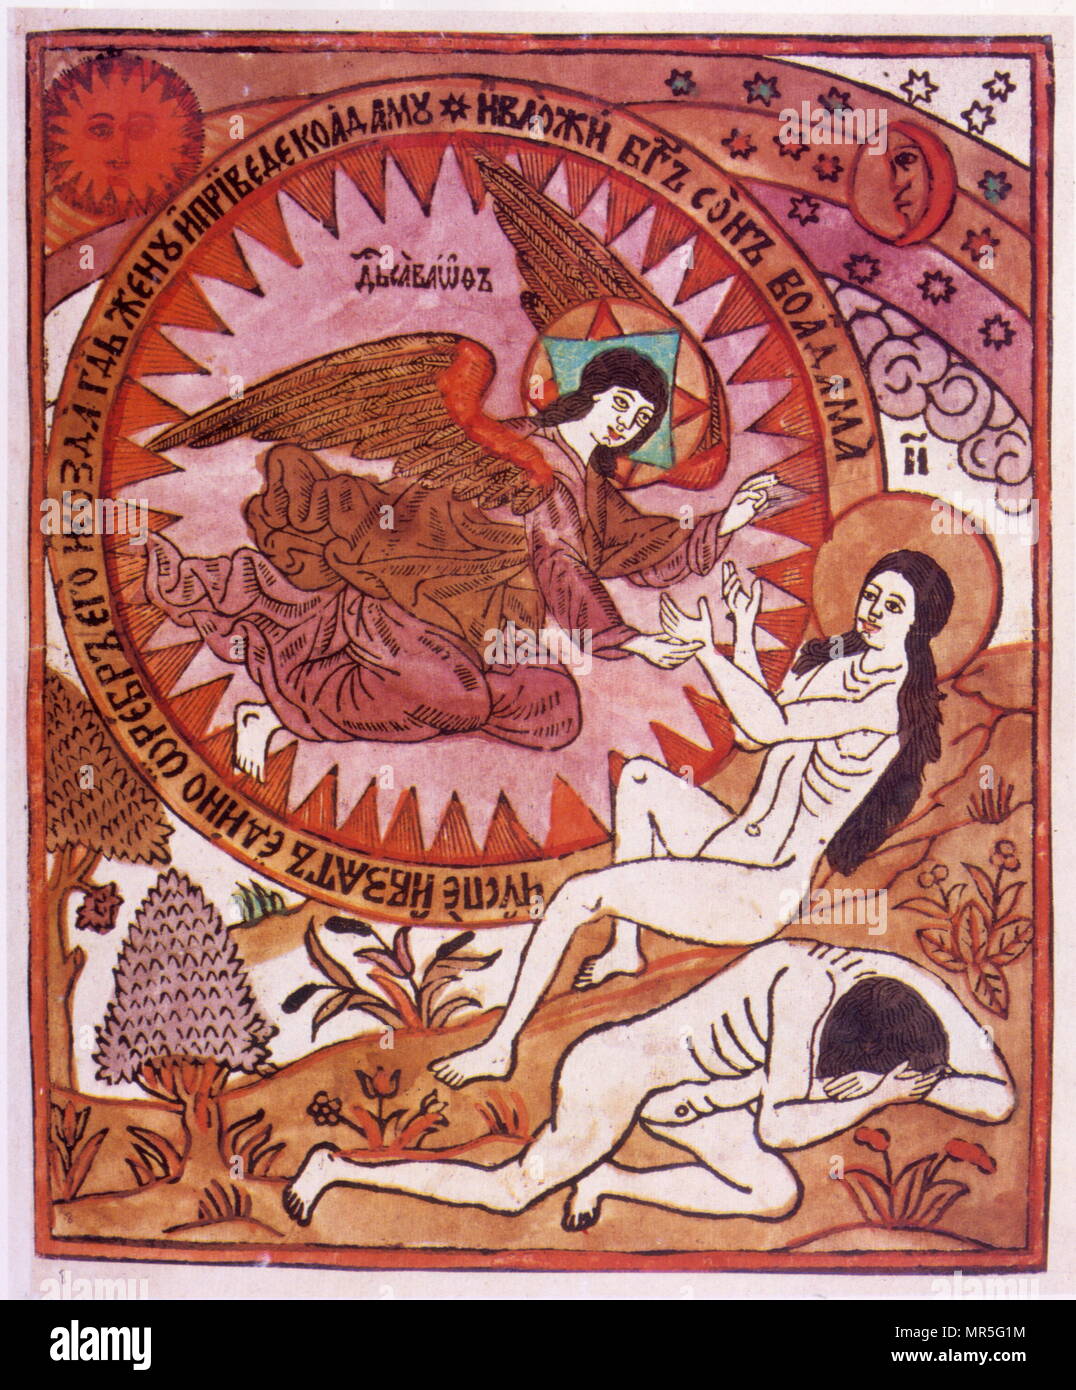 Creation of Eve. Woodcut from the Koren Picture-Bible. An outstanding example of Russian woodcut artistry in the 17th century and of the 'Koren-style' woodcut, which is characteristic of the best of the religious and secular popular prints or lubok, pl. lubki in the first half of the 18th century. The Koren Bible may be considered an example of the (misnamed) Biblia Pauperum. Twenty blocks illustrate the Creation and the Life of Adam and Eve, while sixteen illustrate Revelation. The Koren Bible survives in a single copy. Woodblocks of the Koren Bible were engraved by Vasily Koren of Moscow Stock Photo